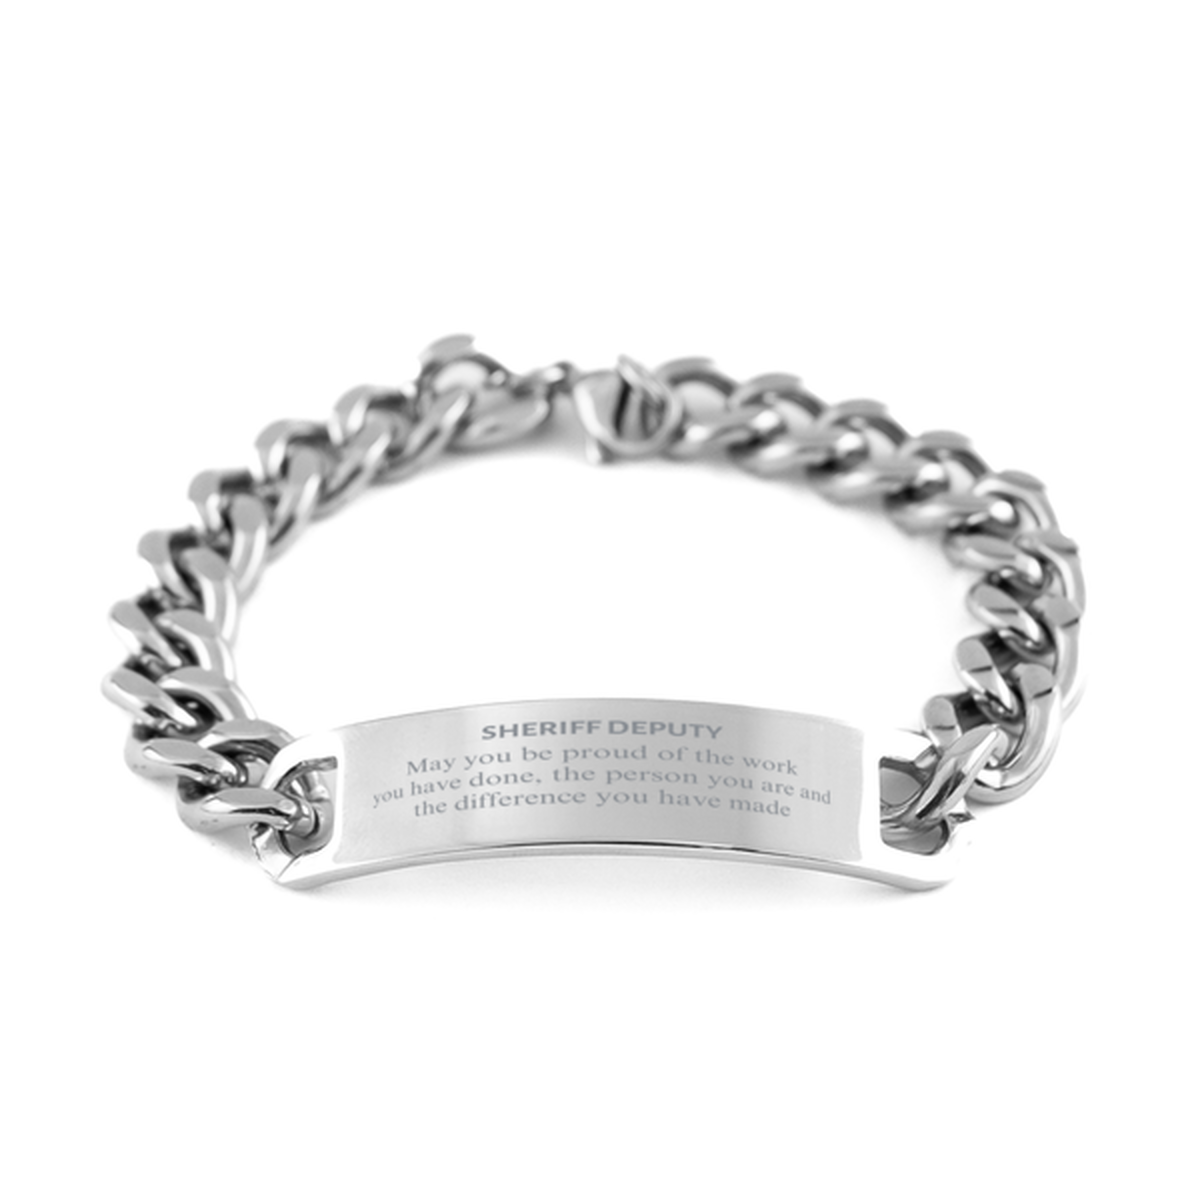 Sheriff Deputy May you be proud of the work you have done, Retirement Sheriff Deputy Cuban Chain Stainless Steel Bracelet for Colleague Appreciation Gifts Amazing for Sheriff Deputy